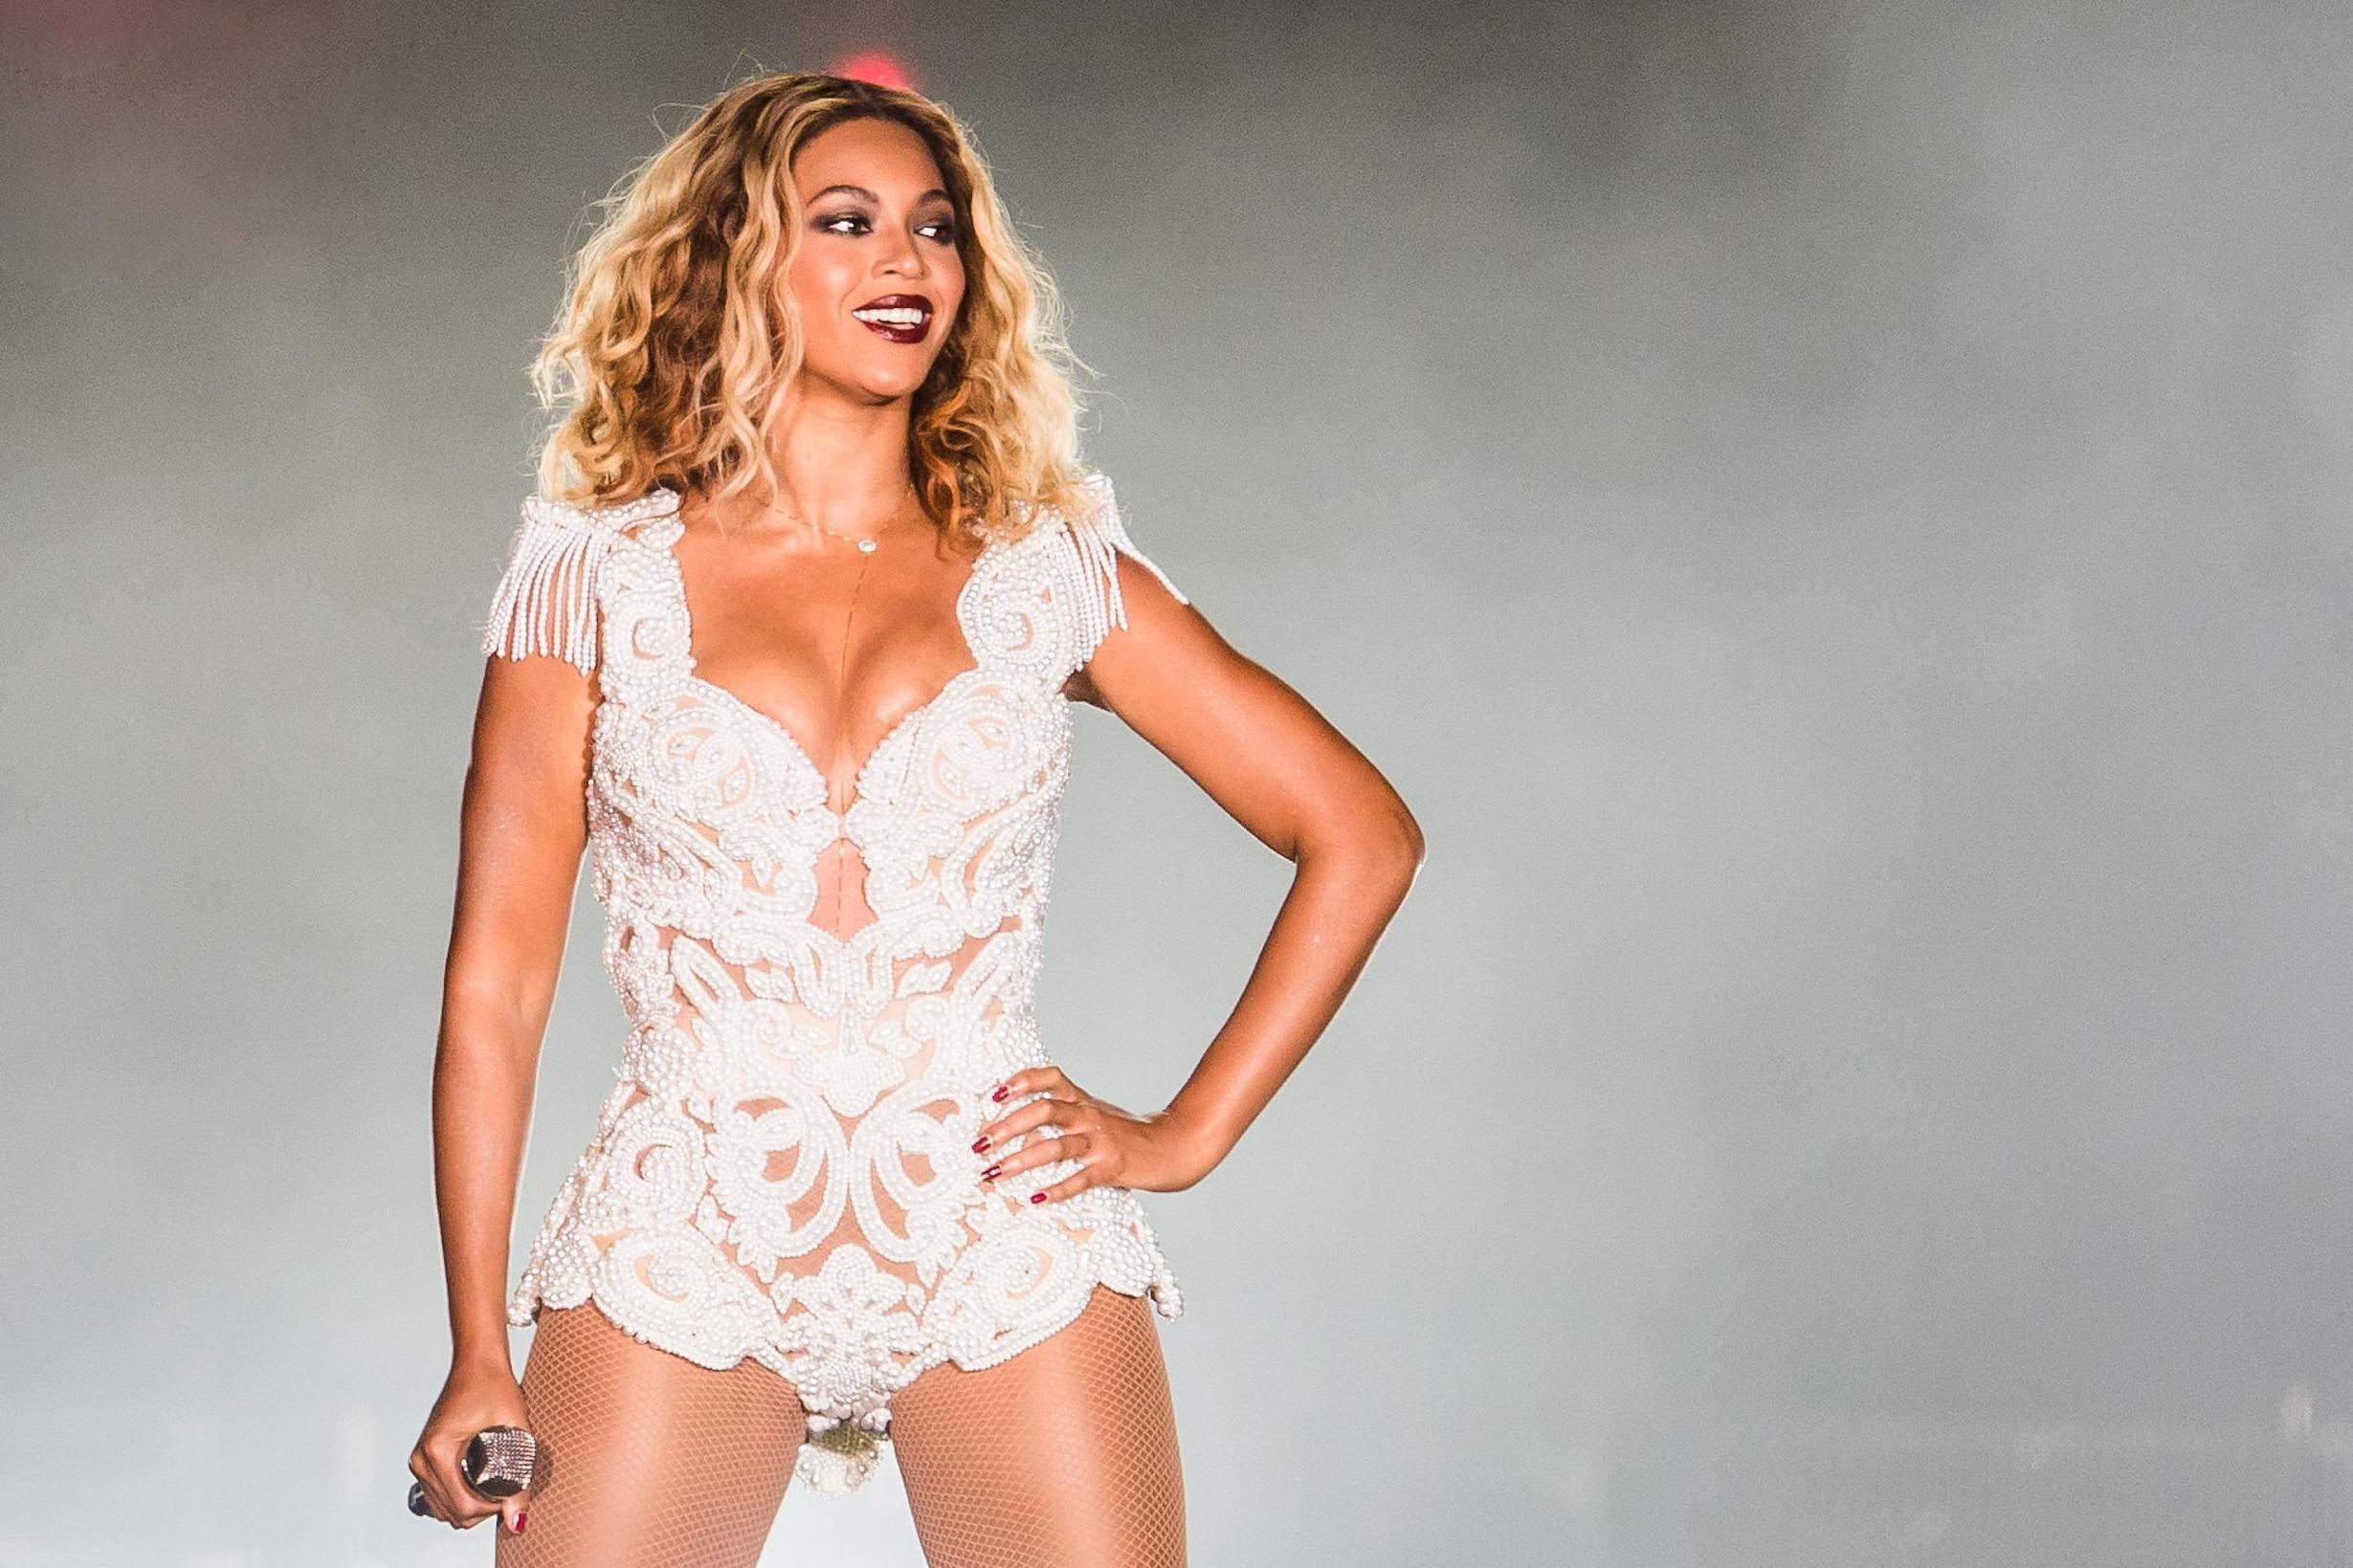 Beyoncé walked out of a meeting with Reebok over a lack of diversity, reports say